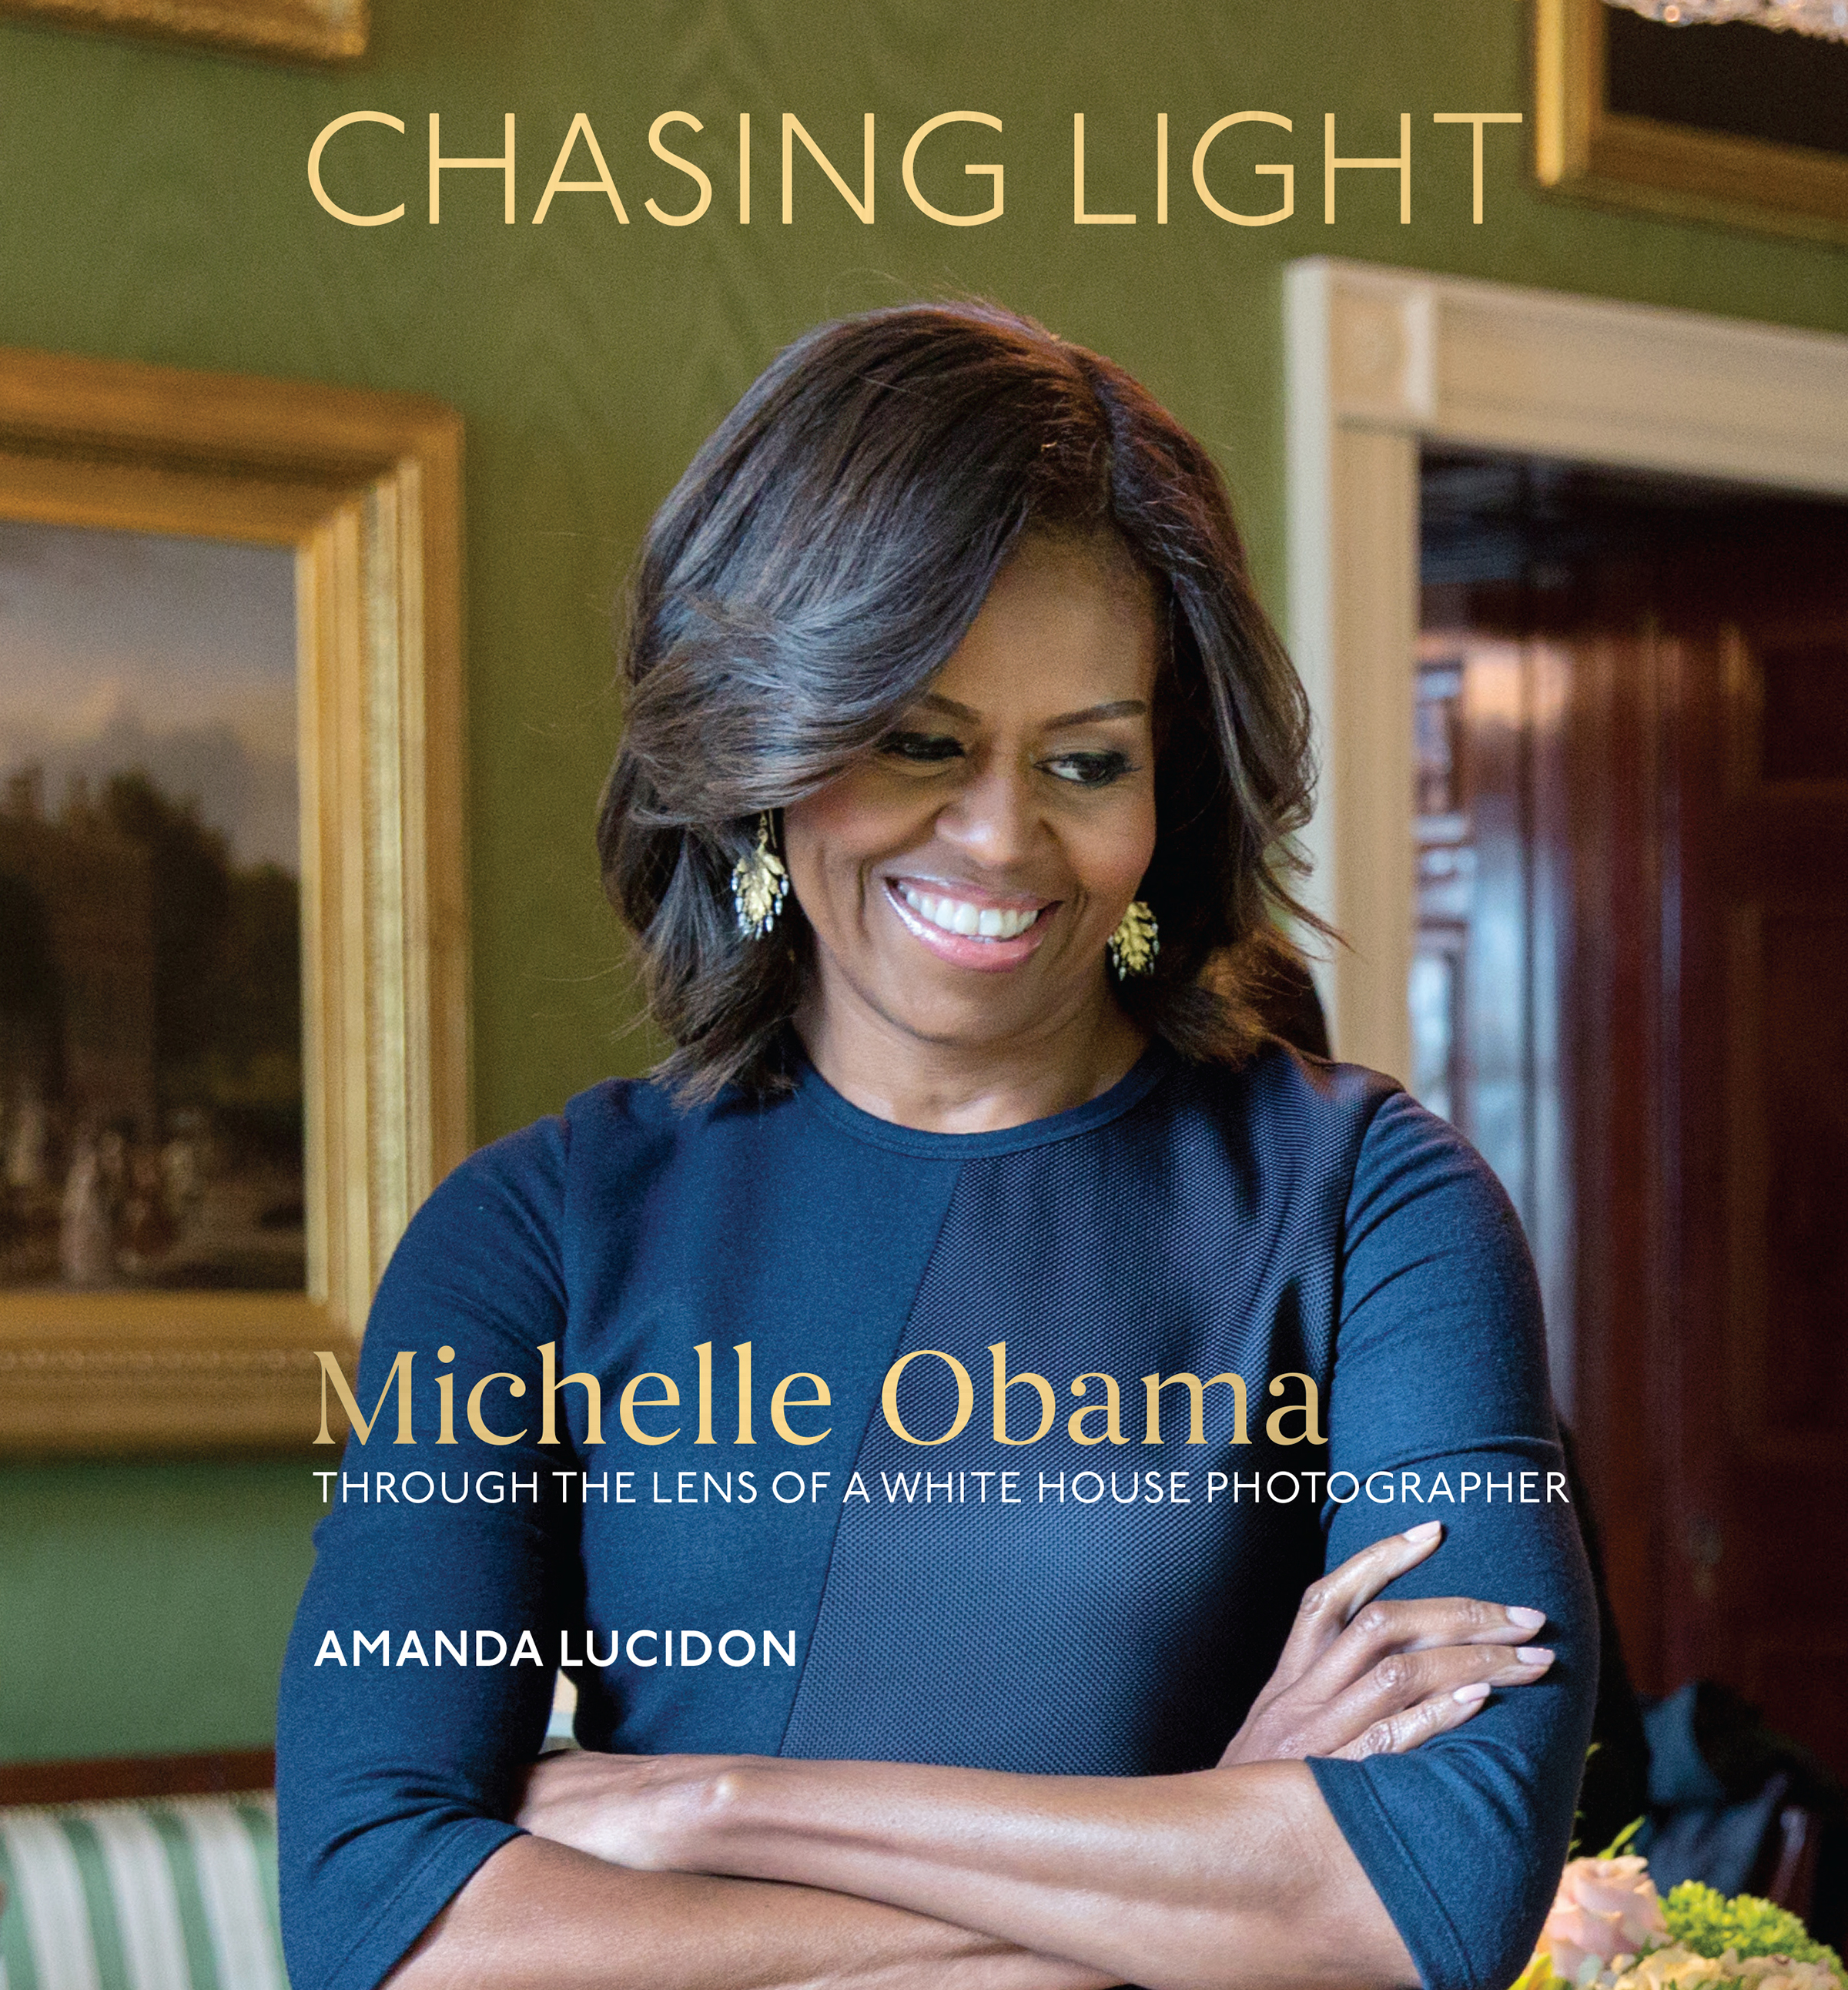 PHOTO: White House photographer Amanda Lucidon shares a collection of her candid photographs from the Obama presidency in a new book, "Chasing Light," which is filled her reflections and lessons she learned from working on the first lady's team.